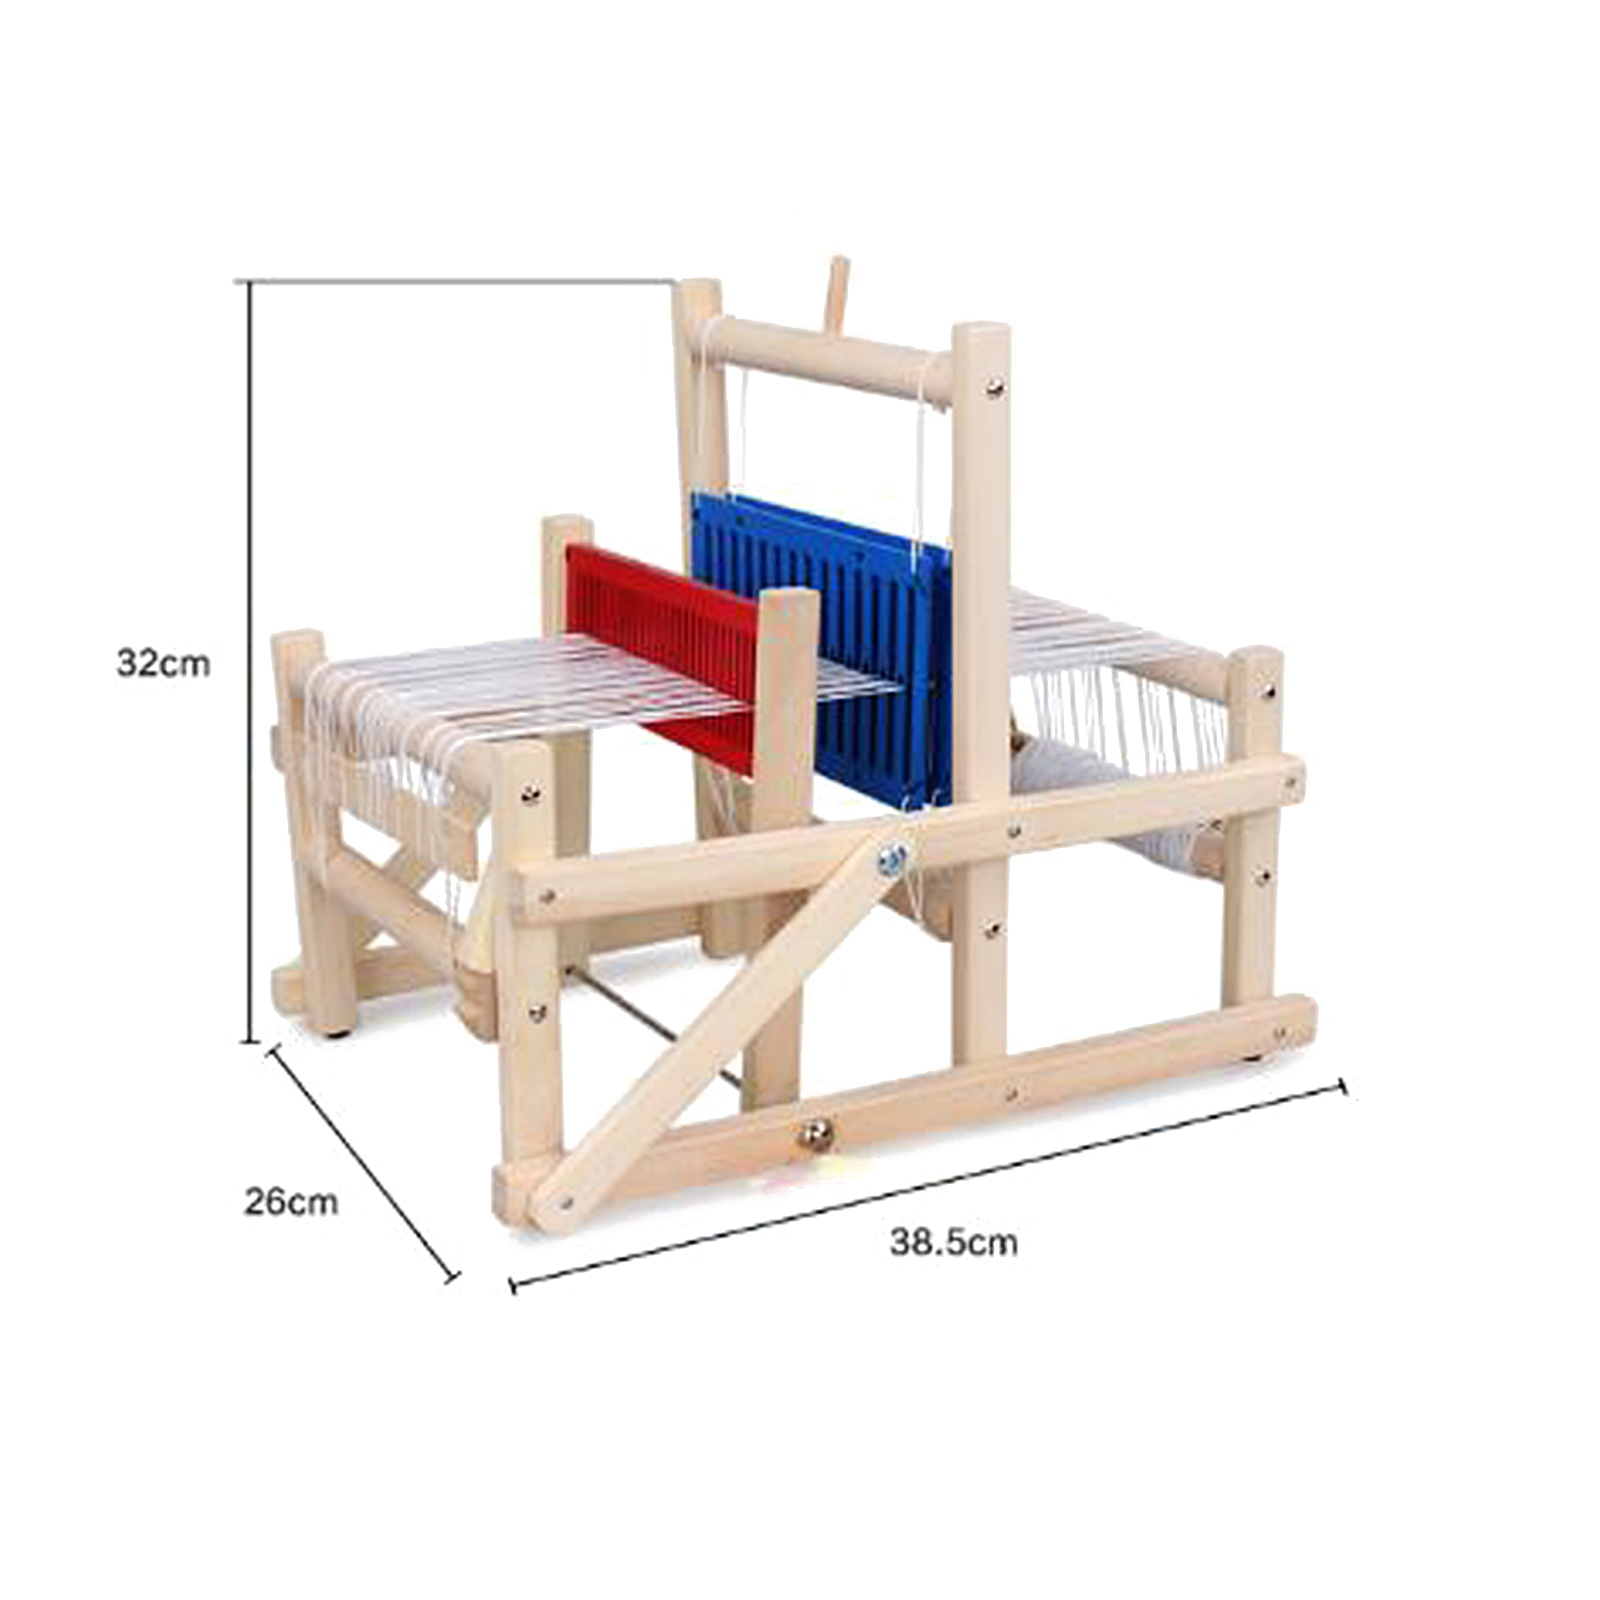 Fityle DIY Hand Knitting Wooden Loom Children Weaving Machine Tool Kids Traditional Educational Toy 